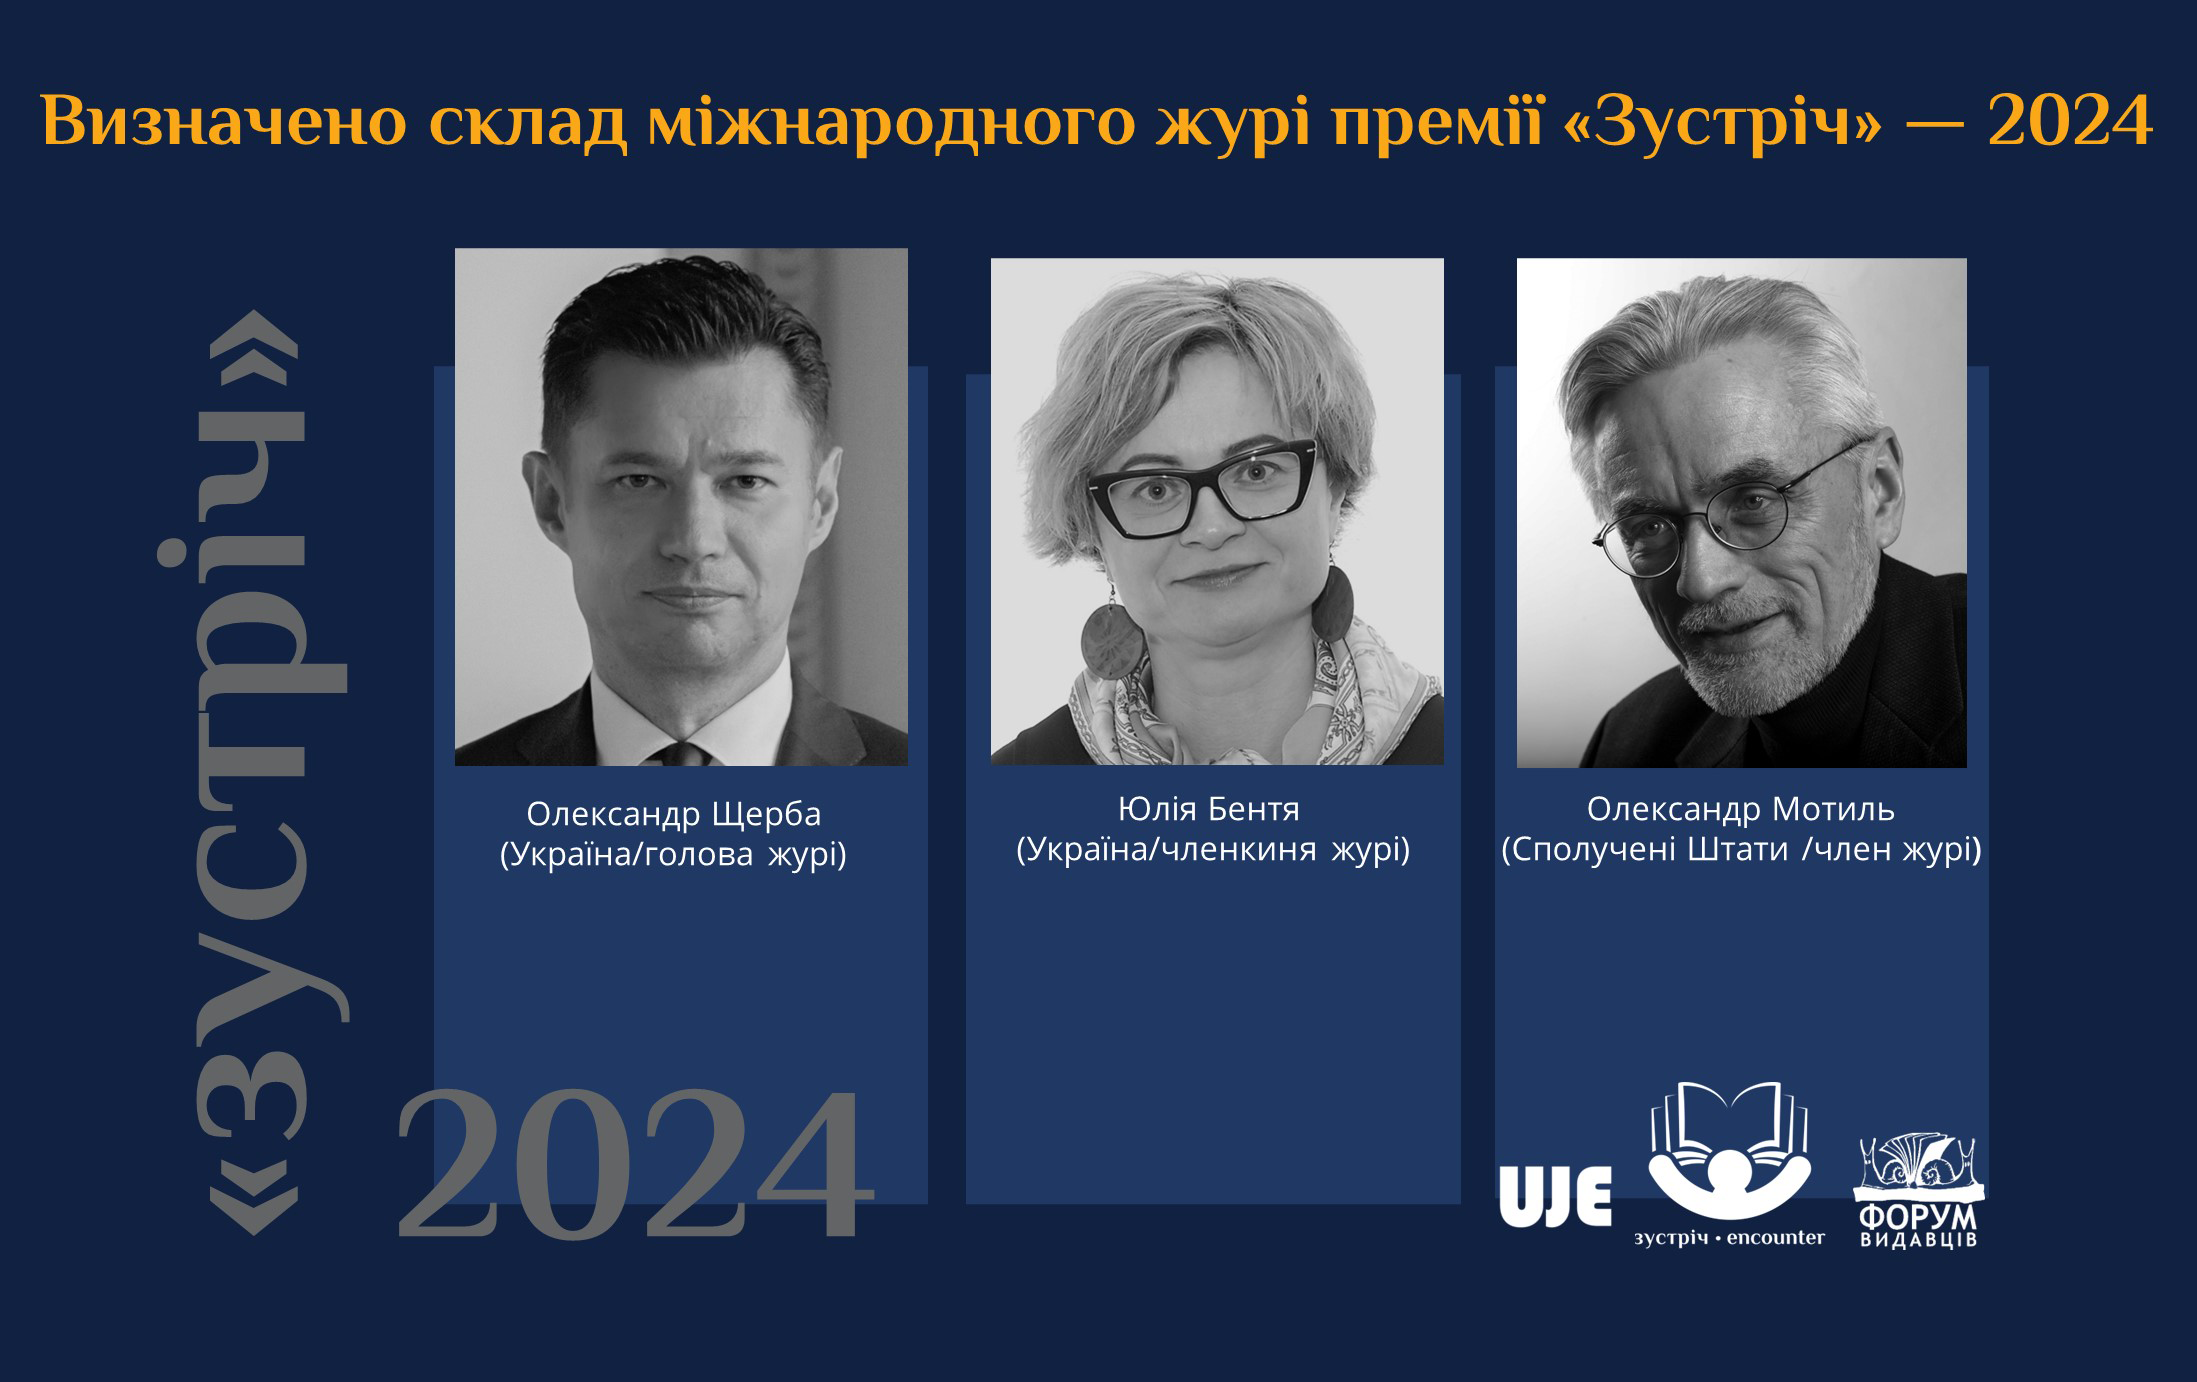 International jury announced for the 2024 'Encounter' prize